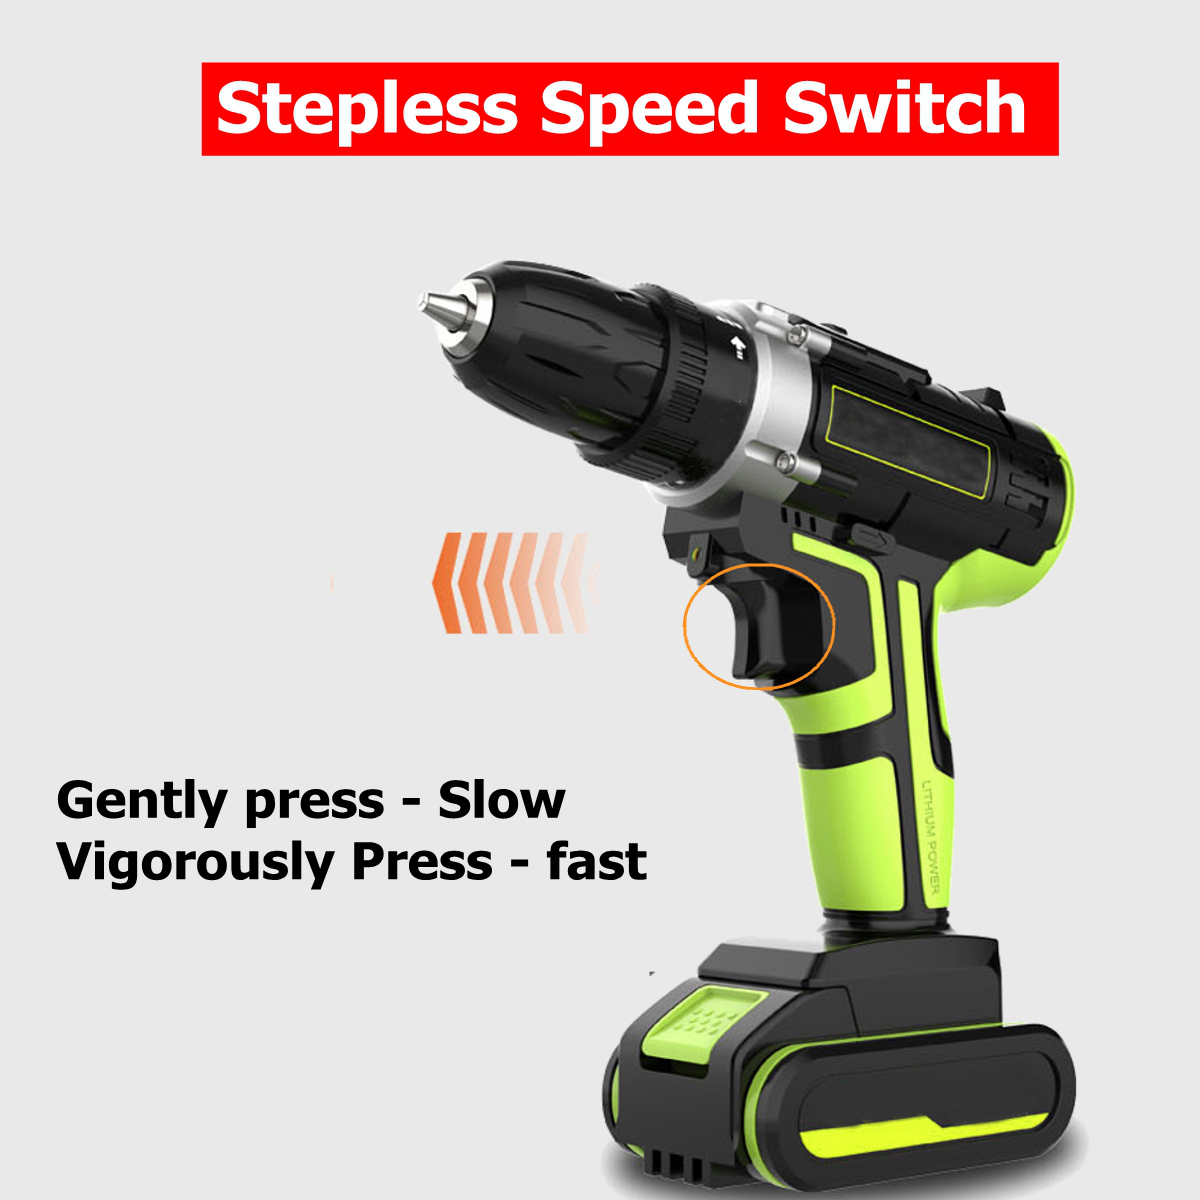 3 In 1 Hammer Drill 48V Cordless Drill Double Speed Power Drills LED lighting 1/2Pcs Large Capacity Battery 50Nm 25+1 Torque Electric Drill